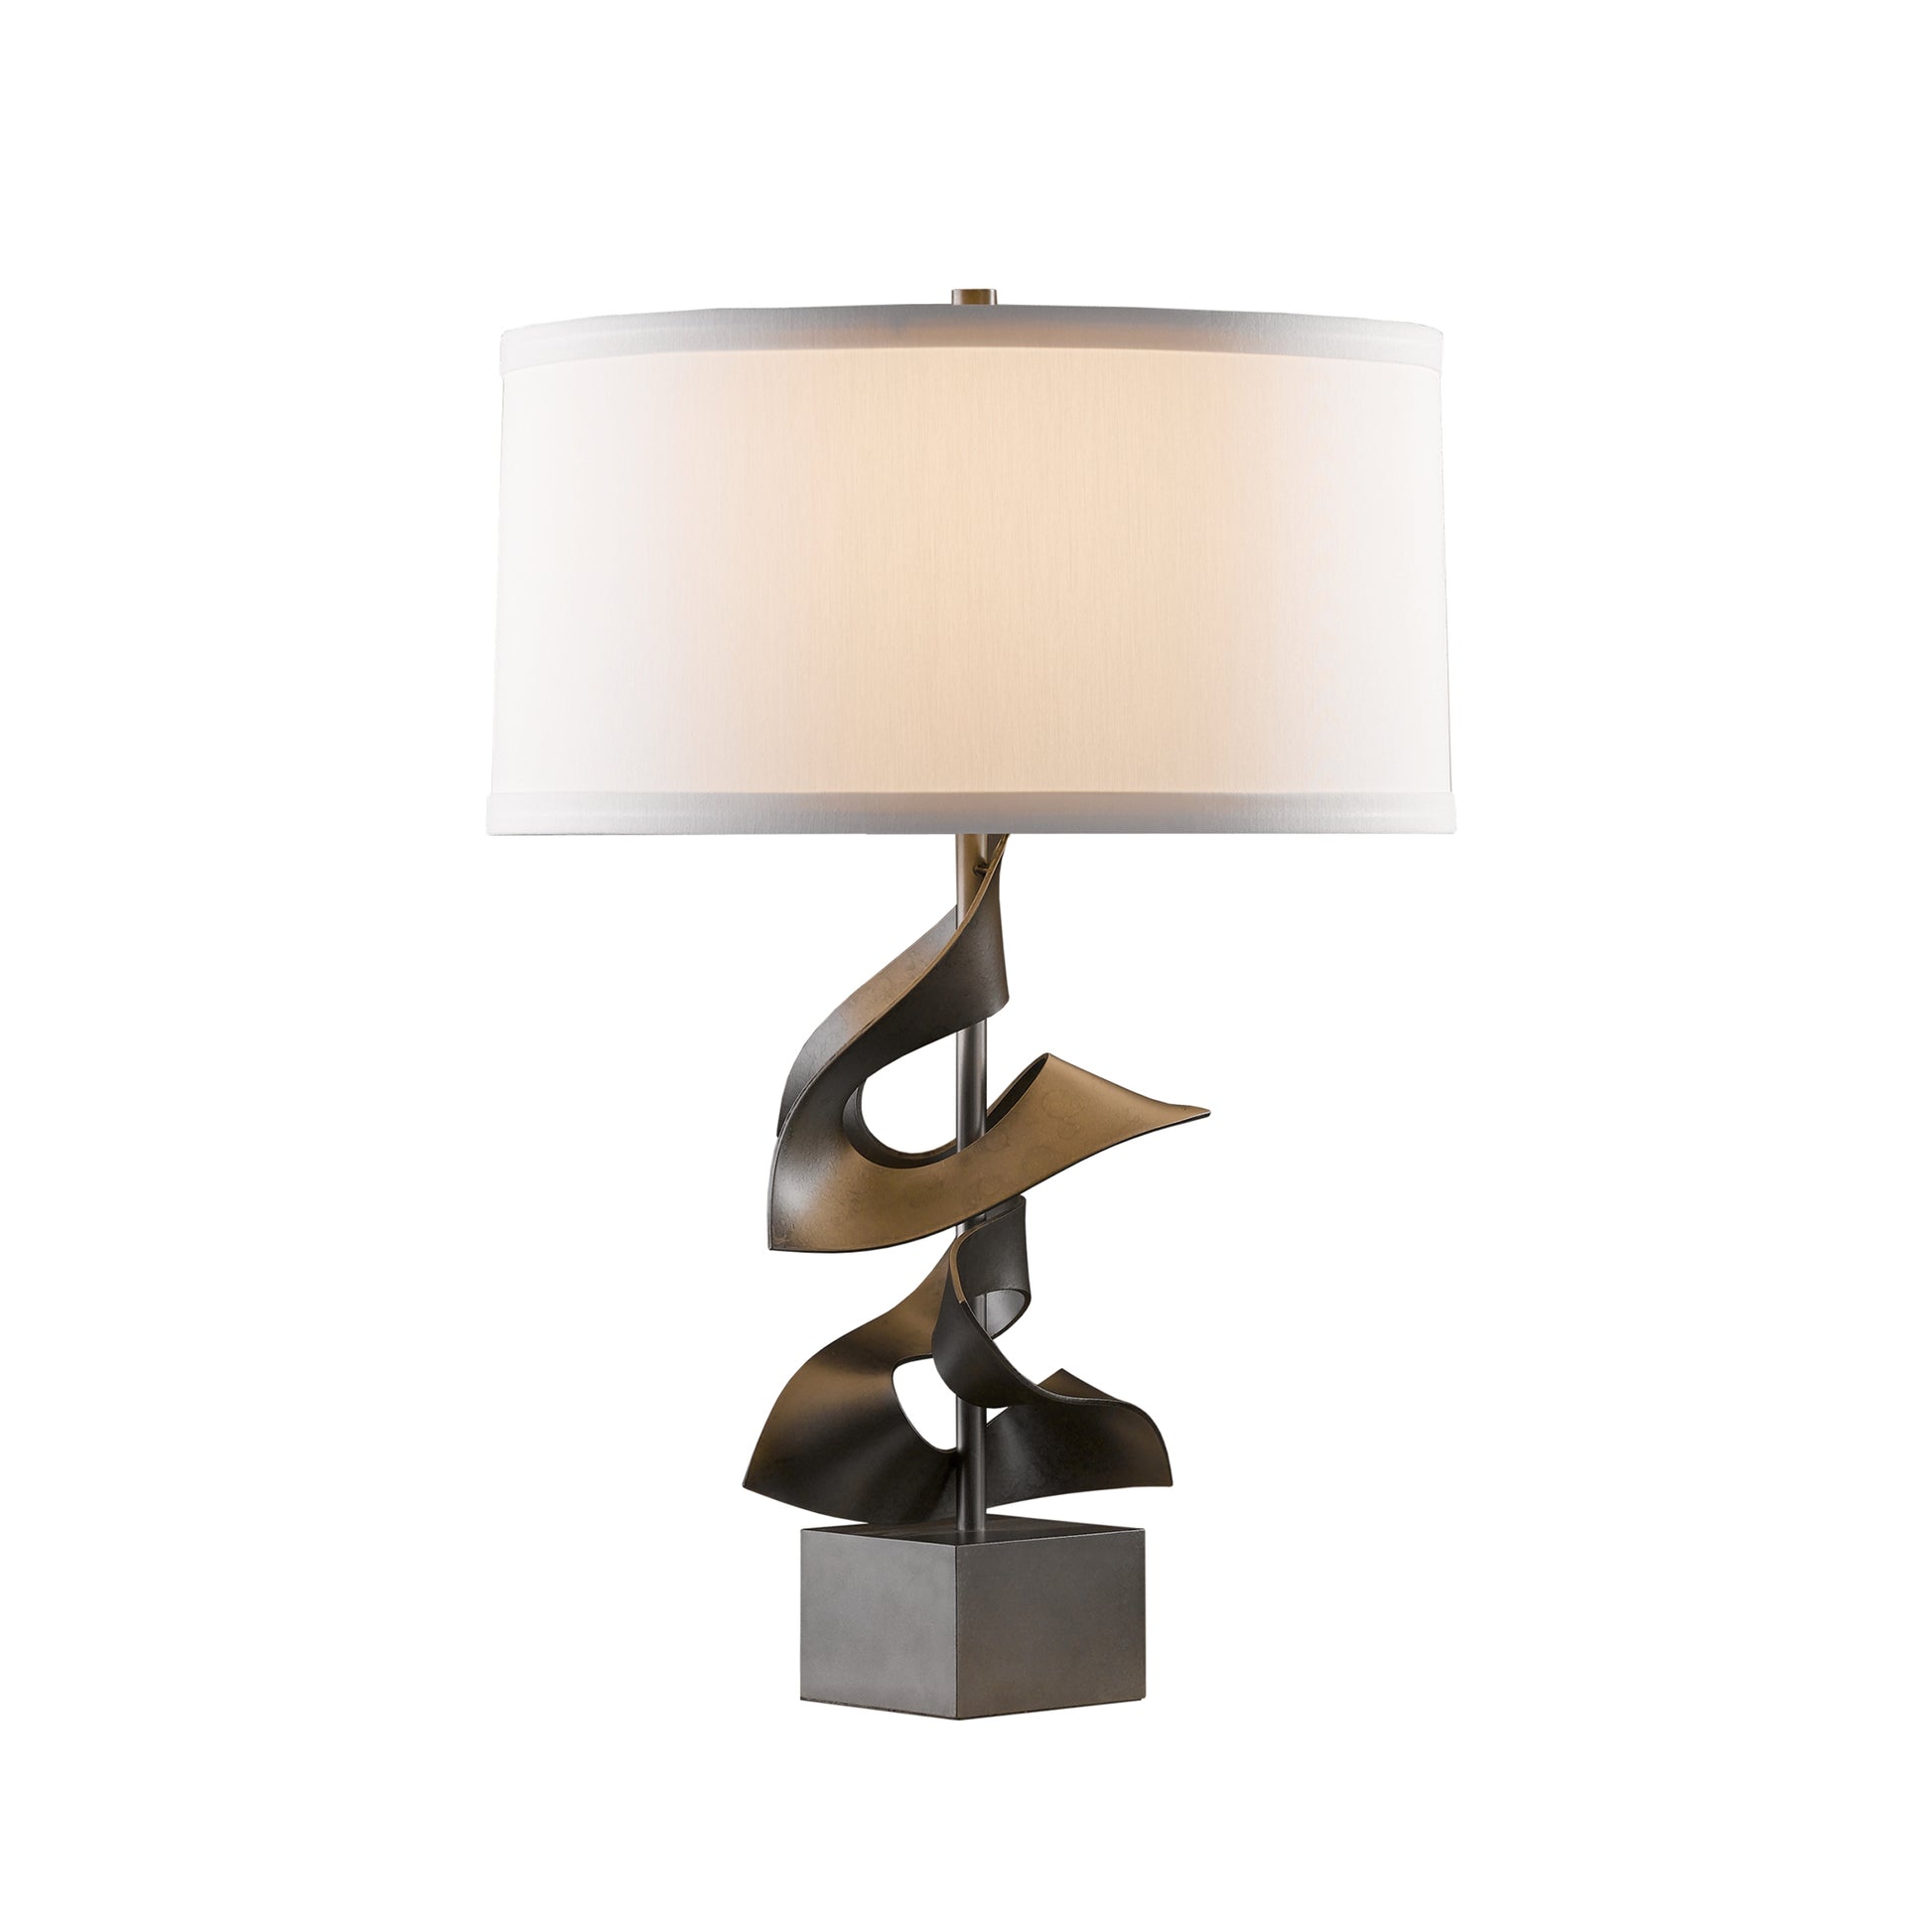 A modern Hubbardton Forge Gallery Two Fold Table Lamp with a sculptural metallic base featuring abstract curves, topped with a white cylindrical shade. The lamp is set against a neutral background.